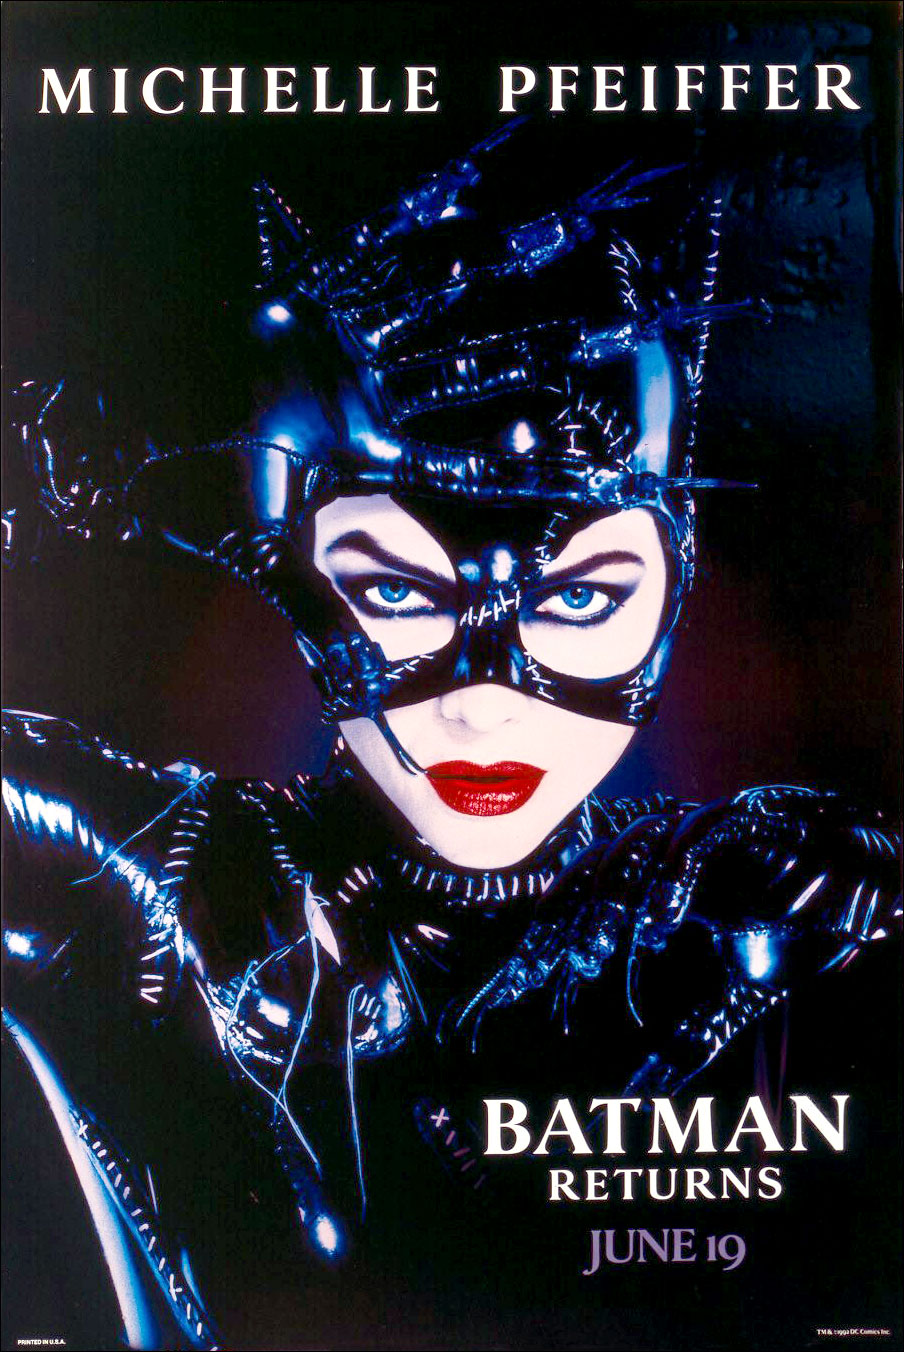 But no matter what michelle pfeiffer is the best Catwoman of all time